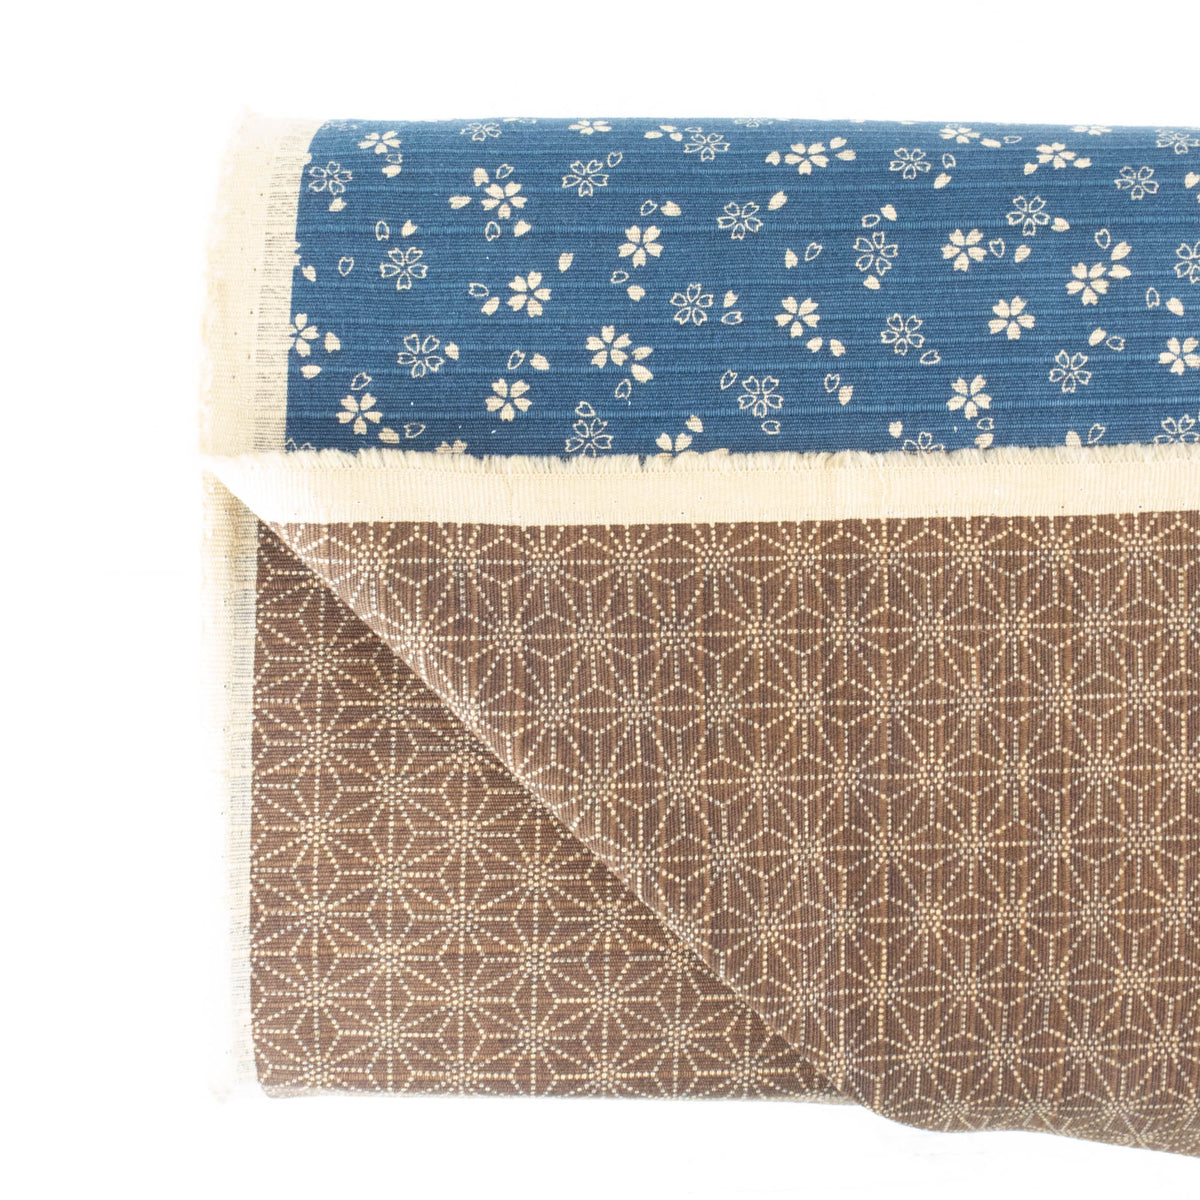 Sevenberry Double-Sided Cotton Dobby Fabric - Blue/Brown